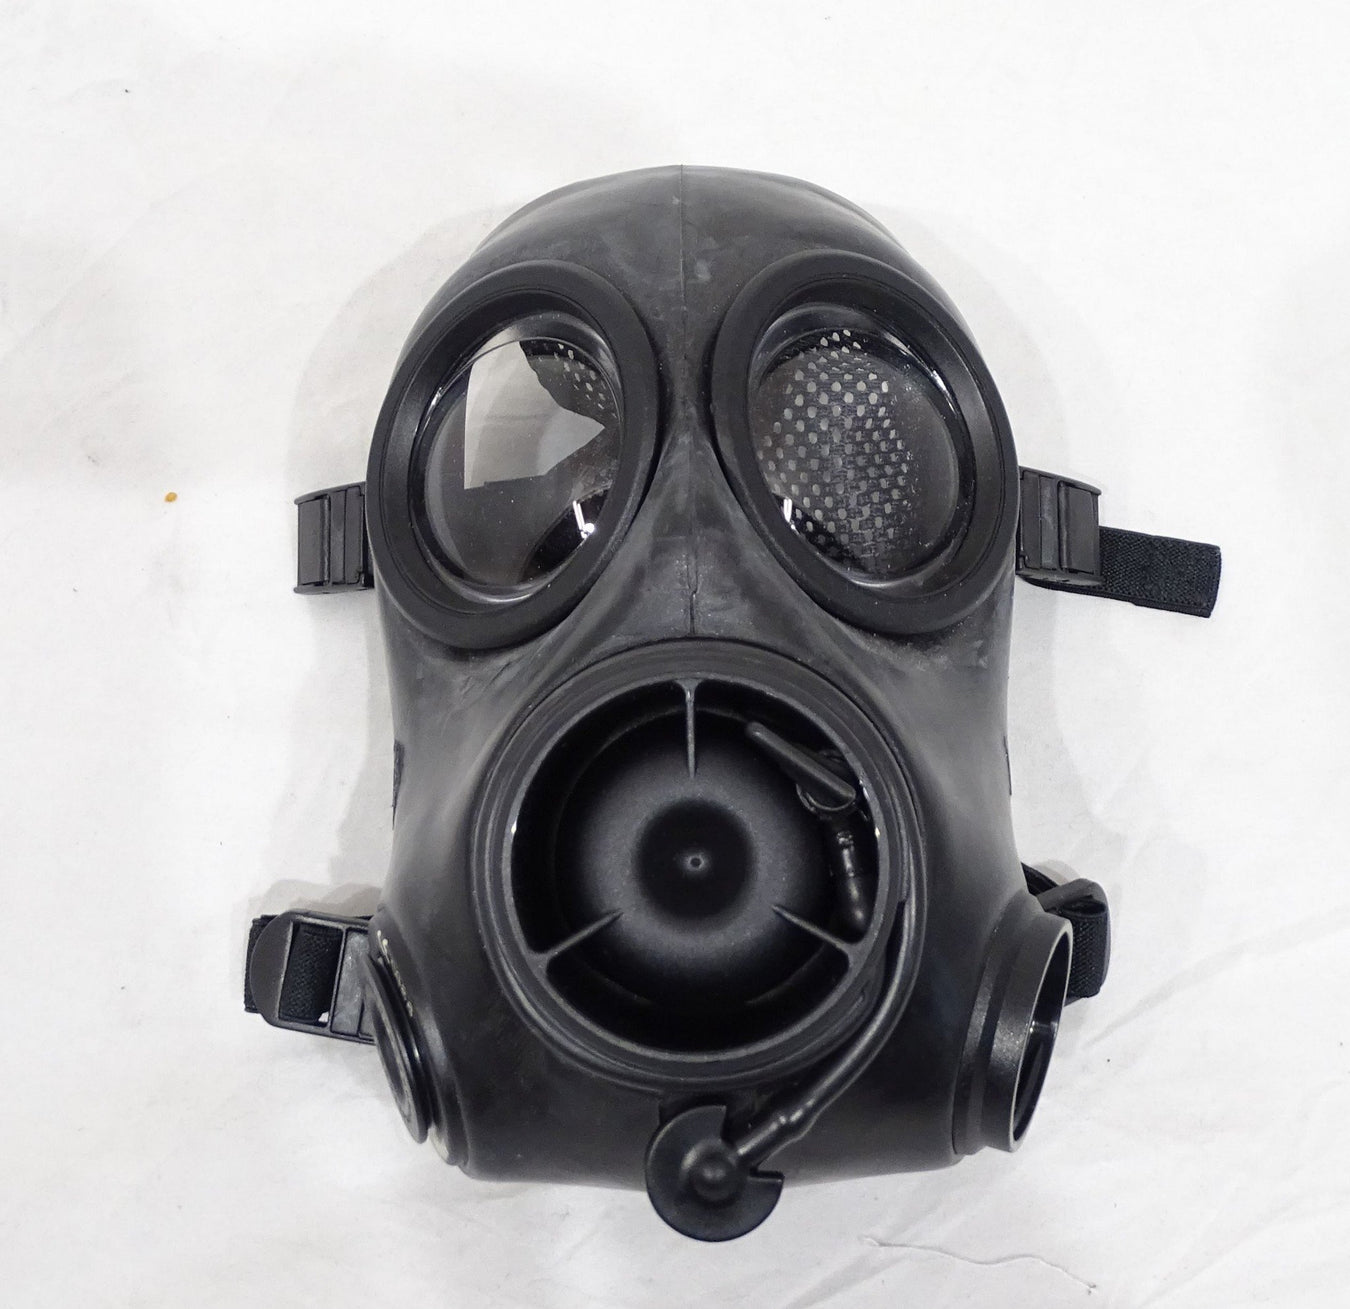 Gas Masks & Filters